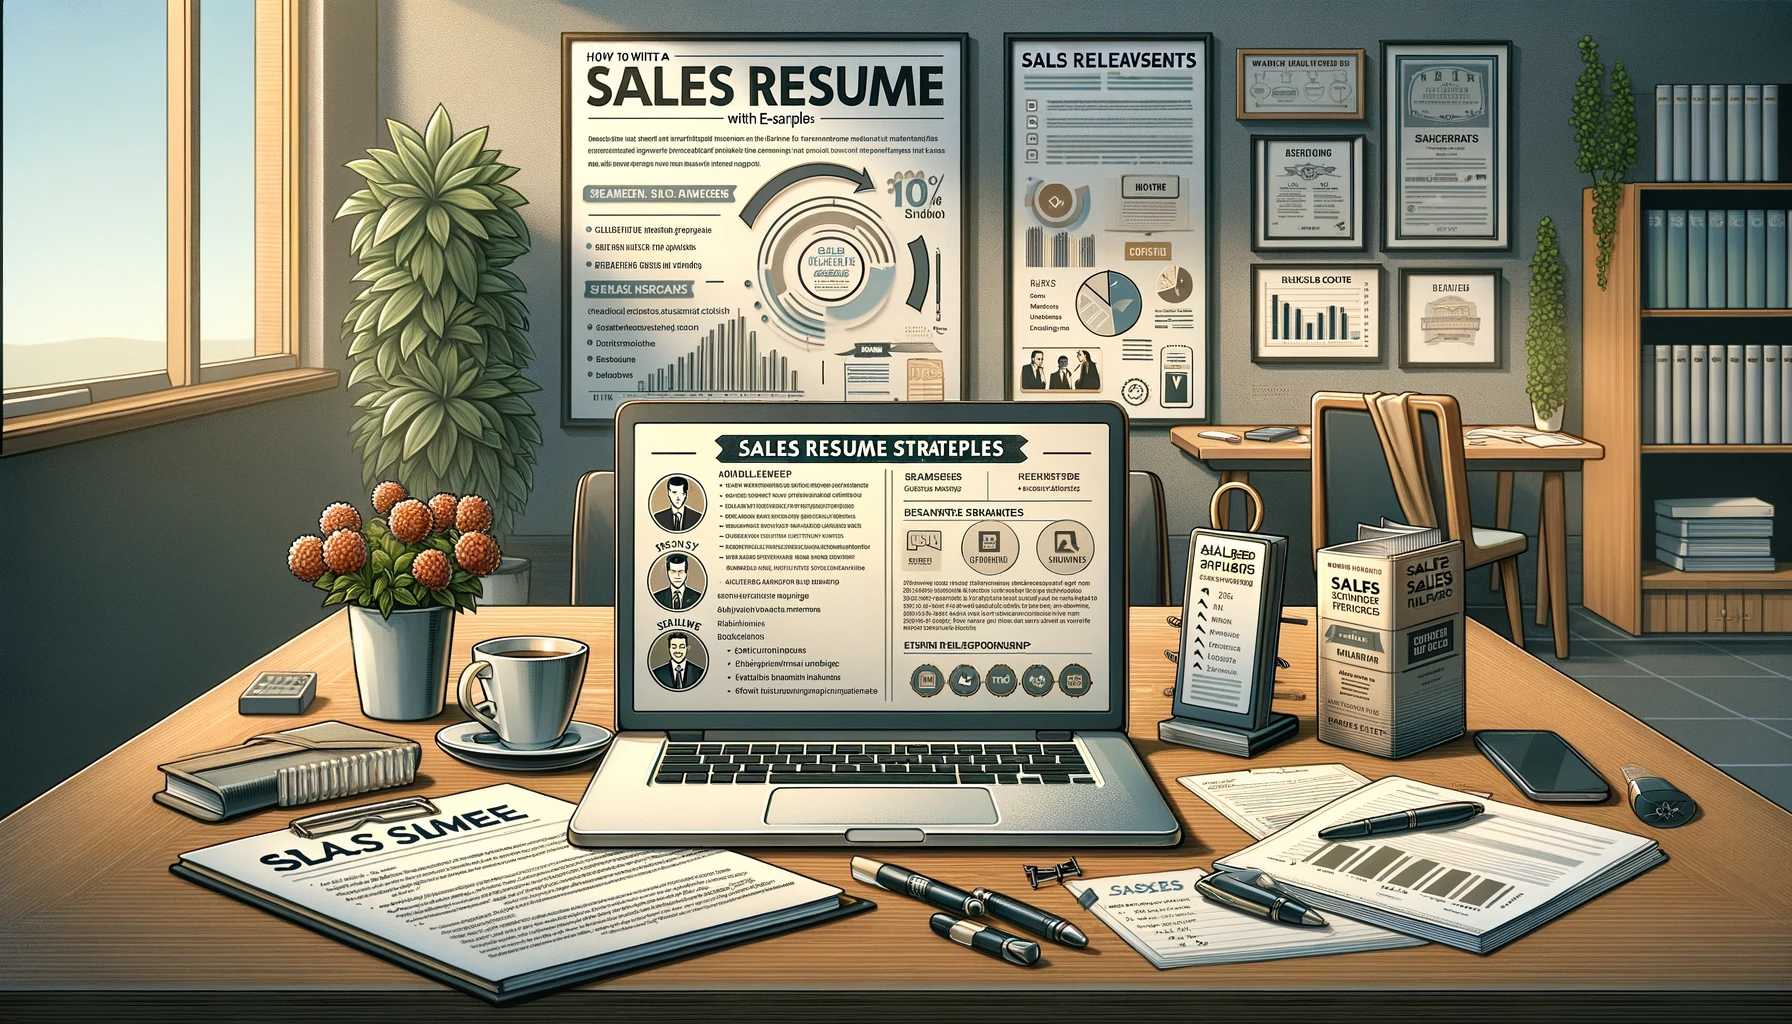 How to Write a Sales Resume (With Examples)